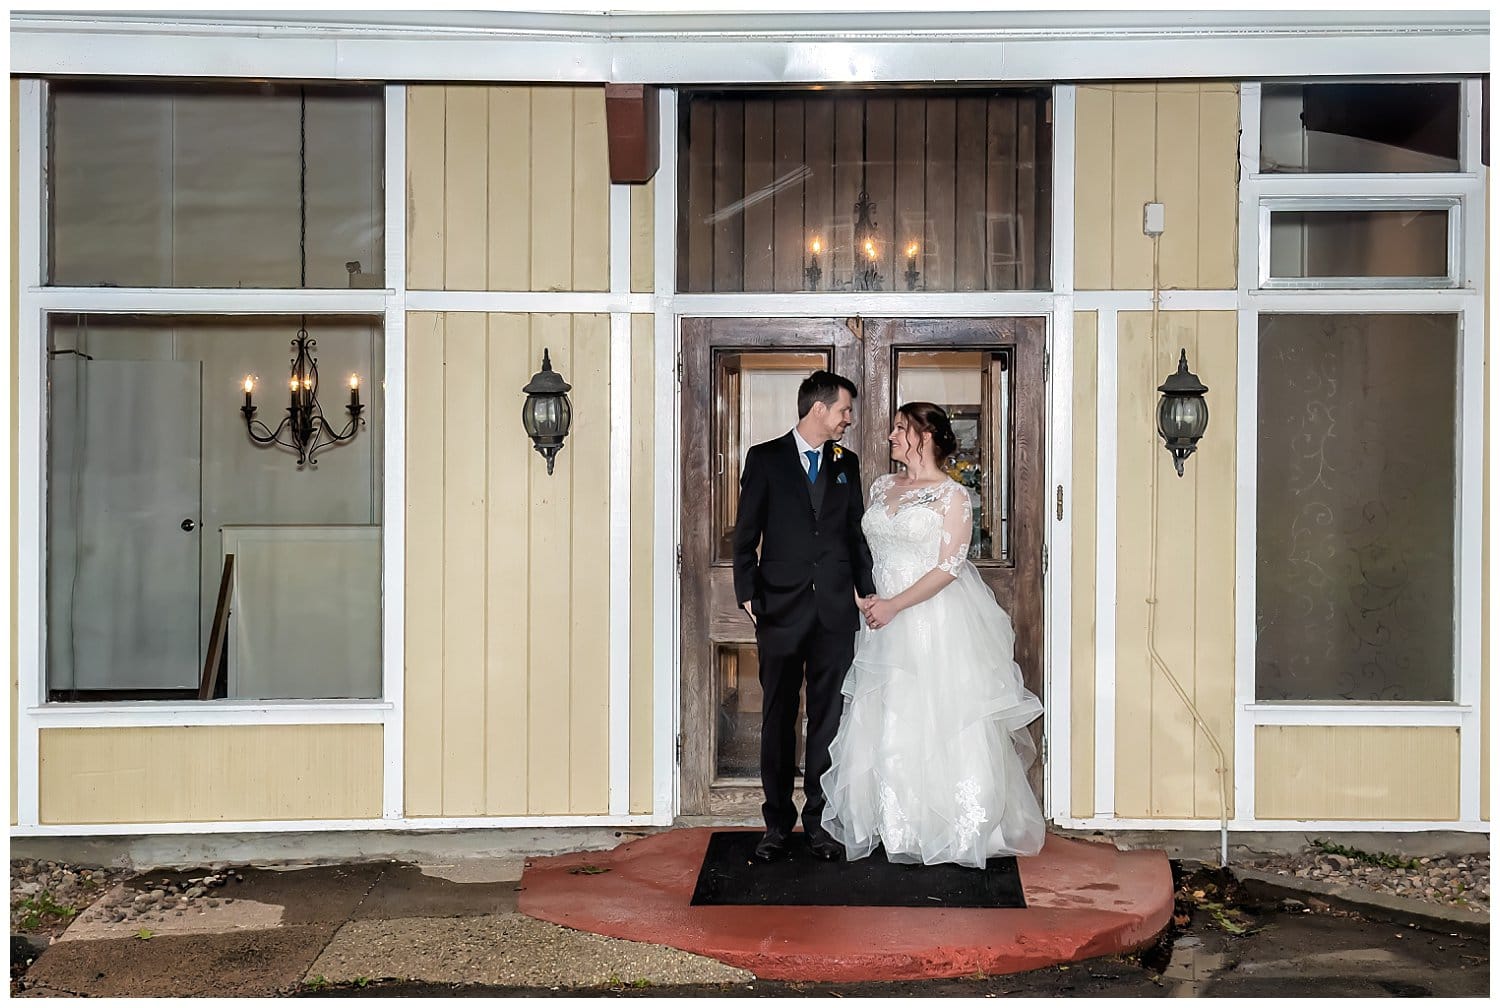 The bride and groom pose in front of the Saraguay House for romantic elegant wedding photos.